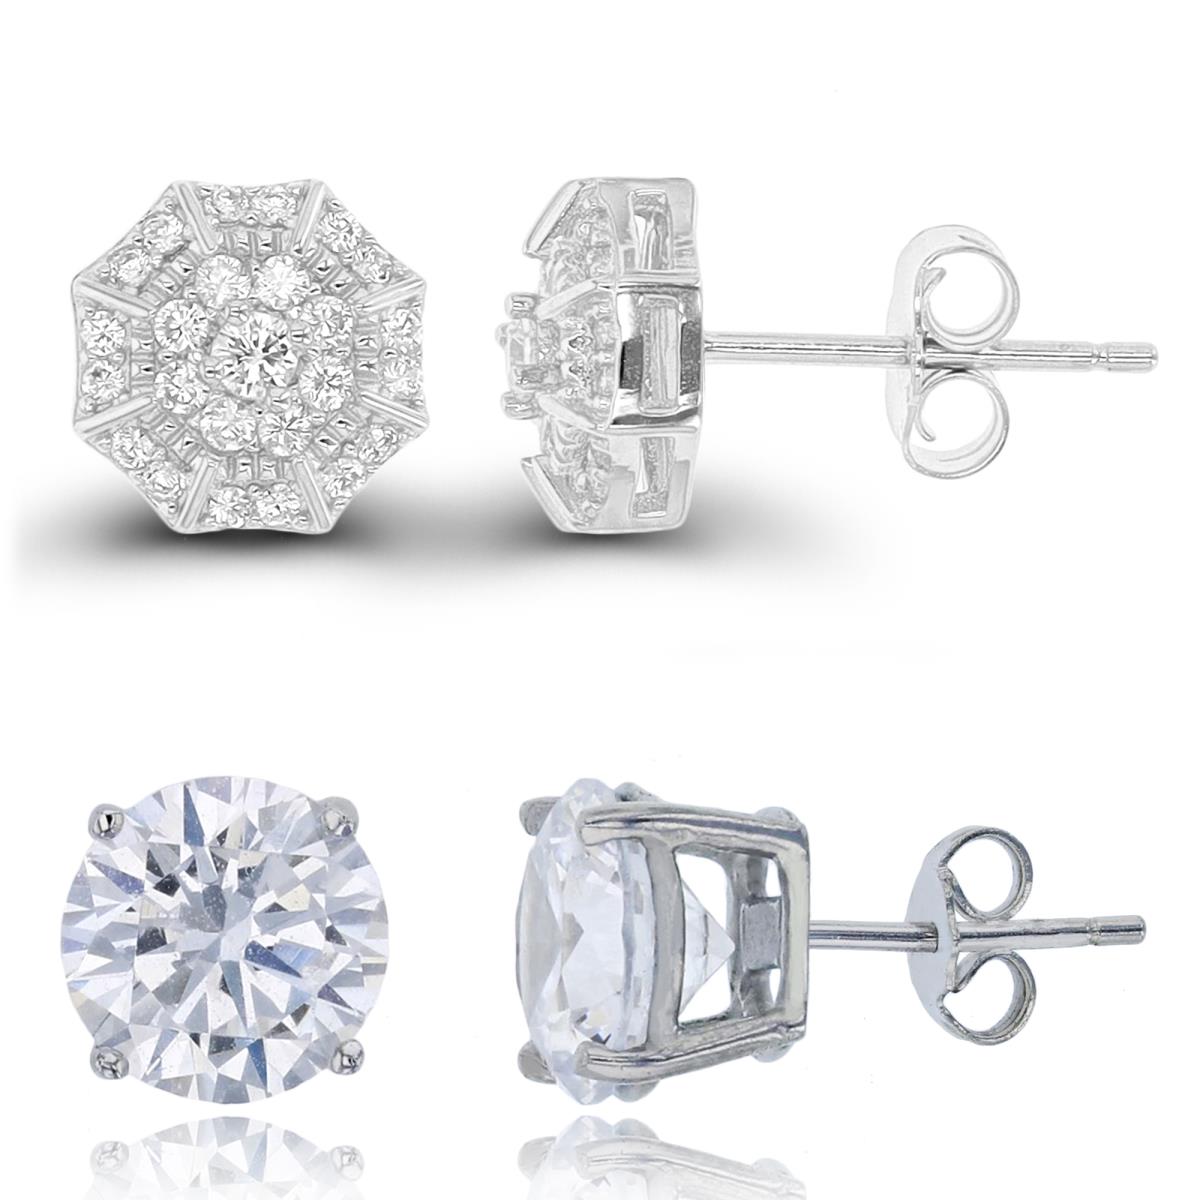 Sterling Silver Rhodium Paved Octagon & 8mm Rd Stud Earring Set